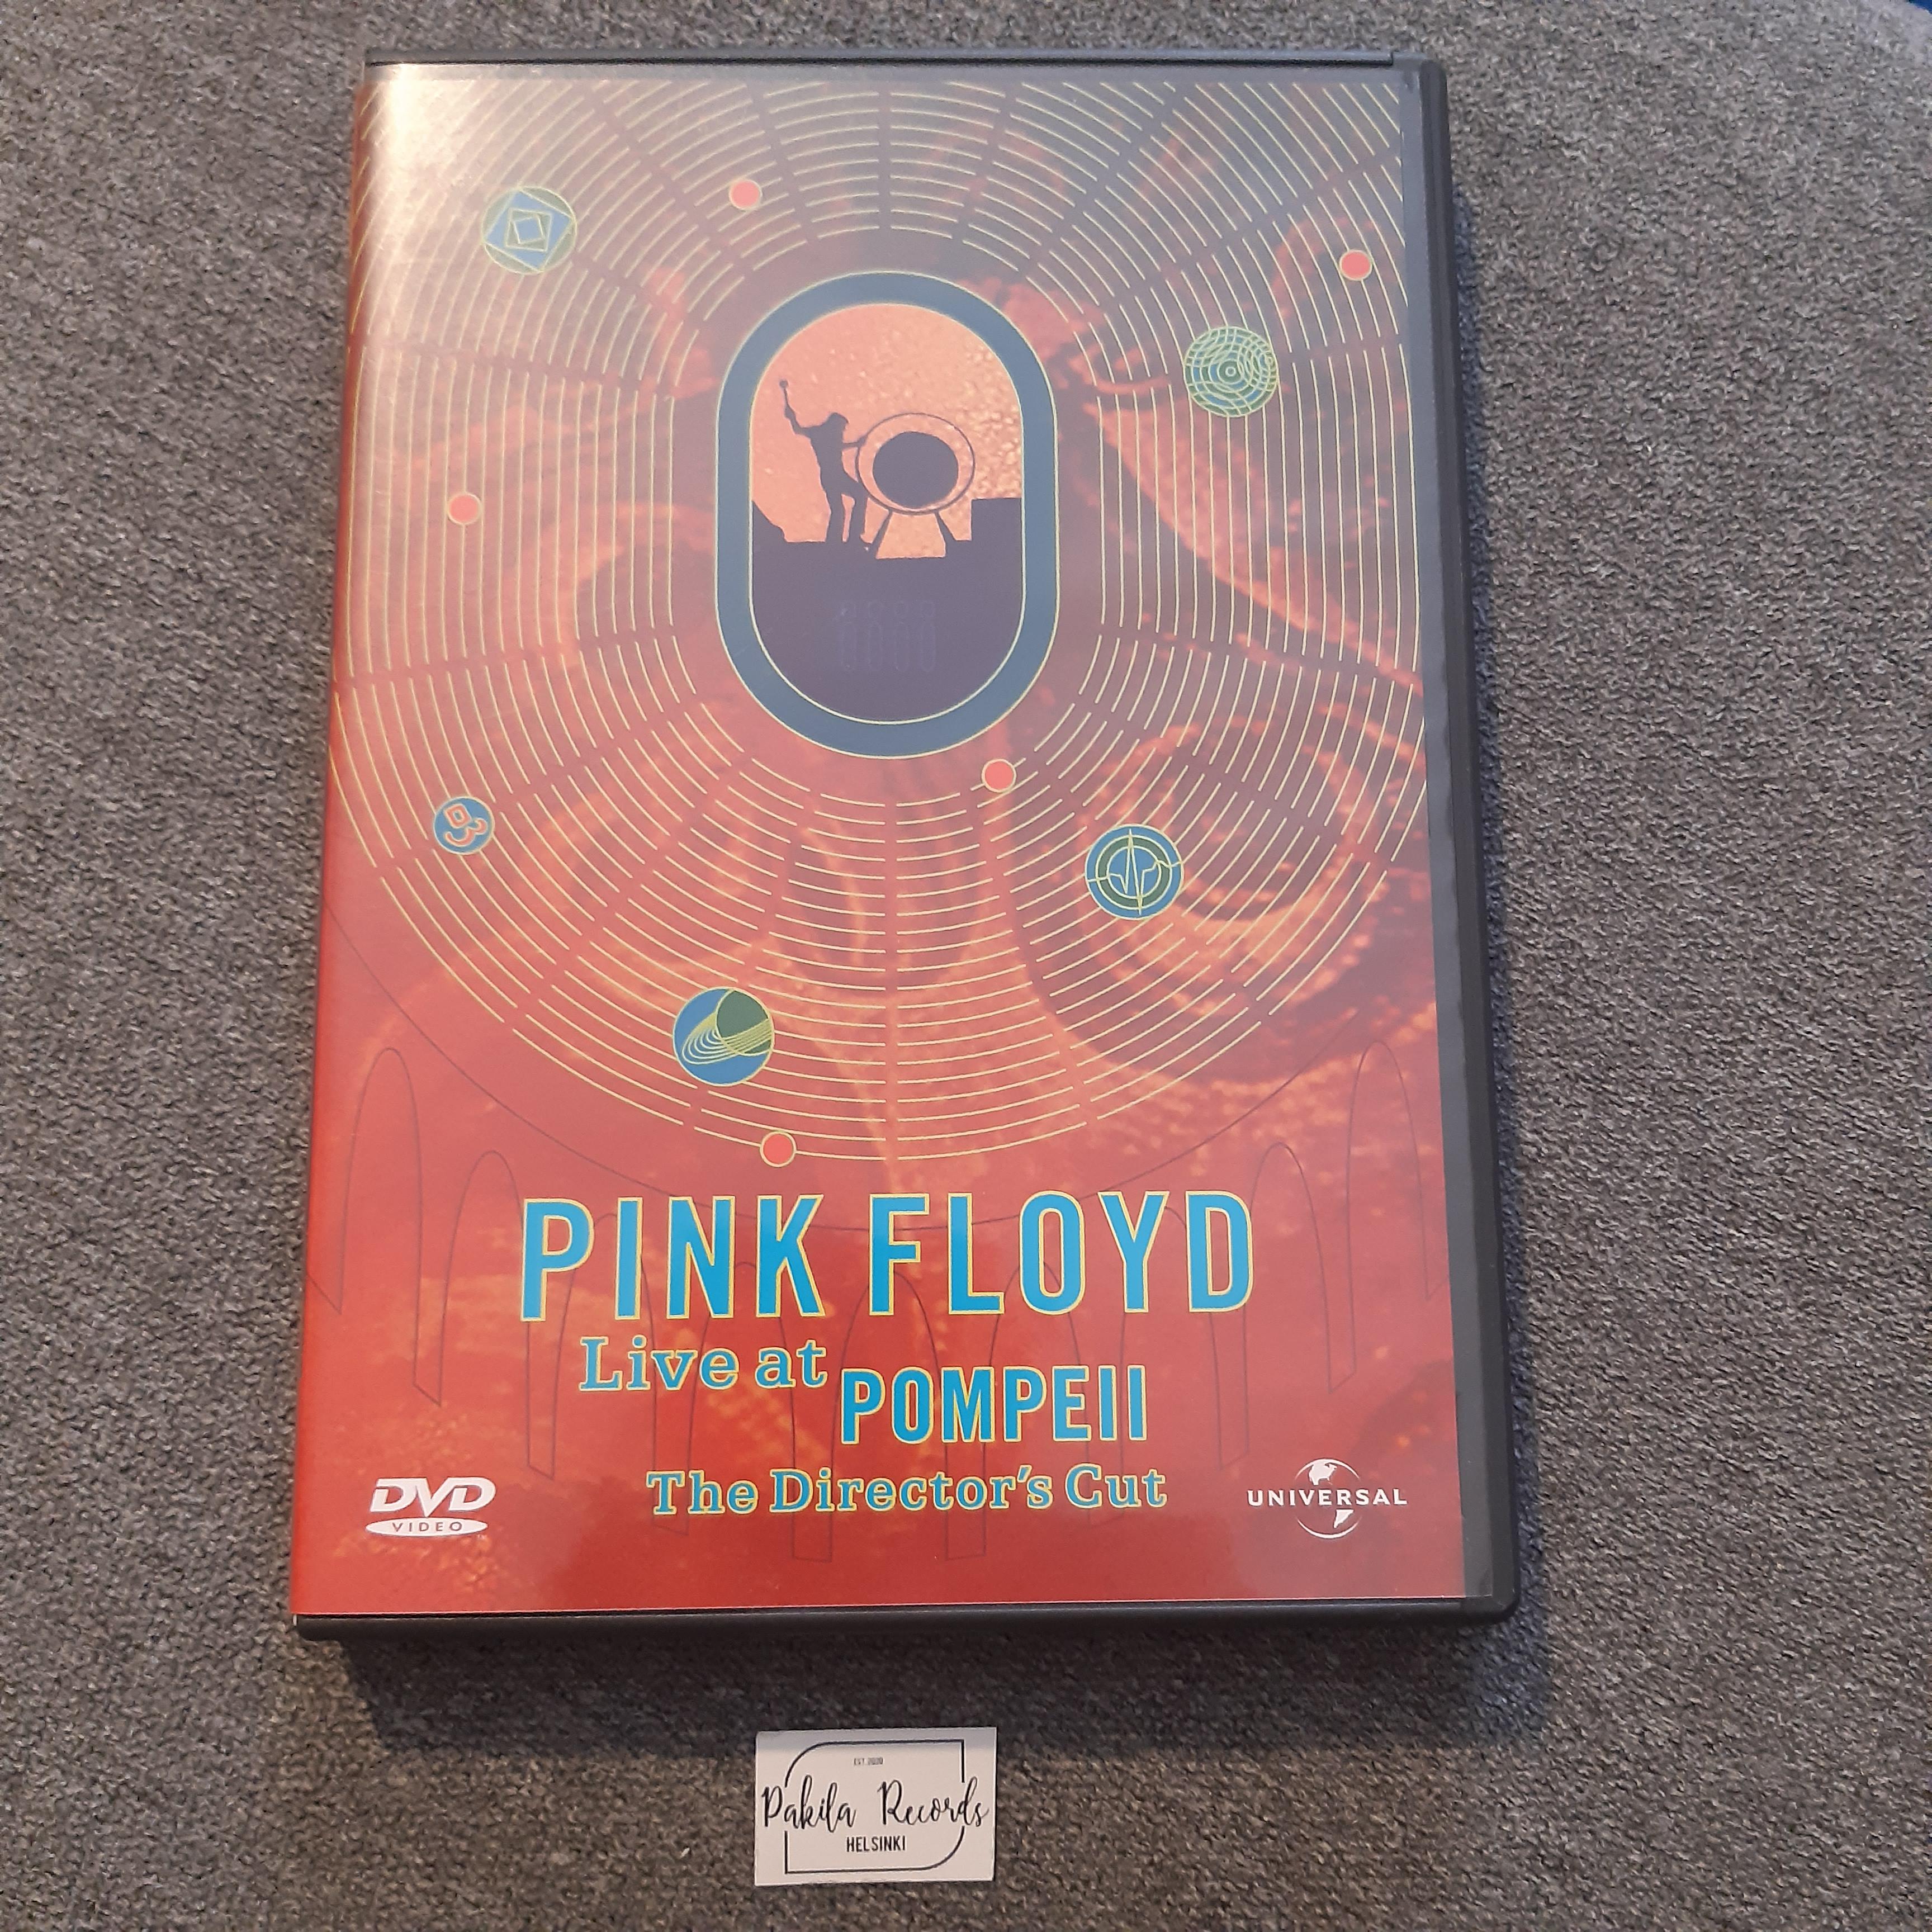 Pink Floyd - Live At Pompeii (The Director's Cut) - DVD (käytetty)